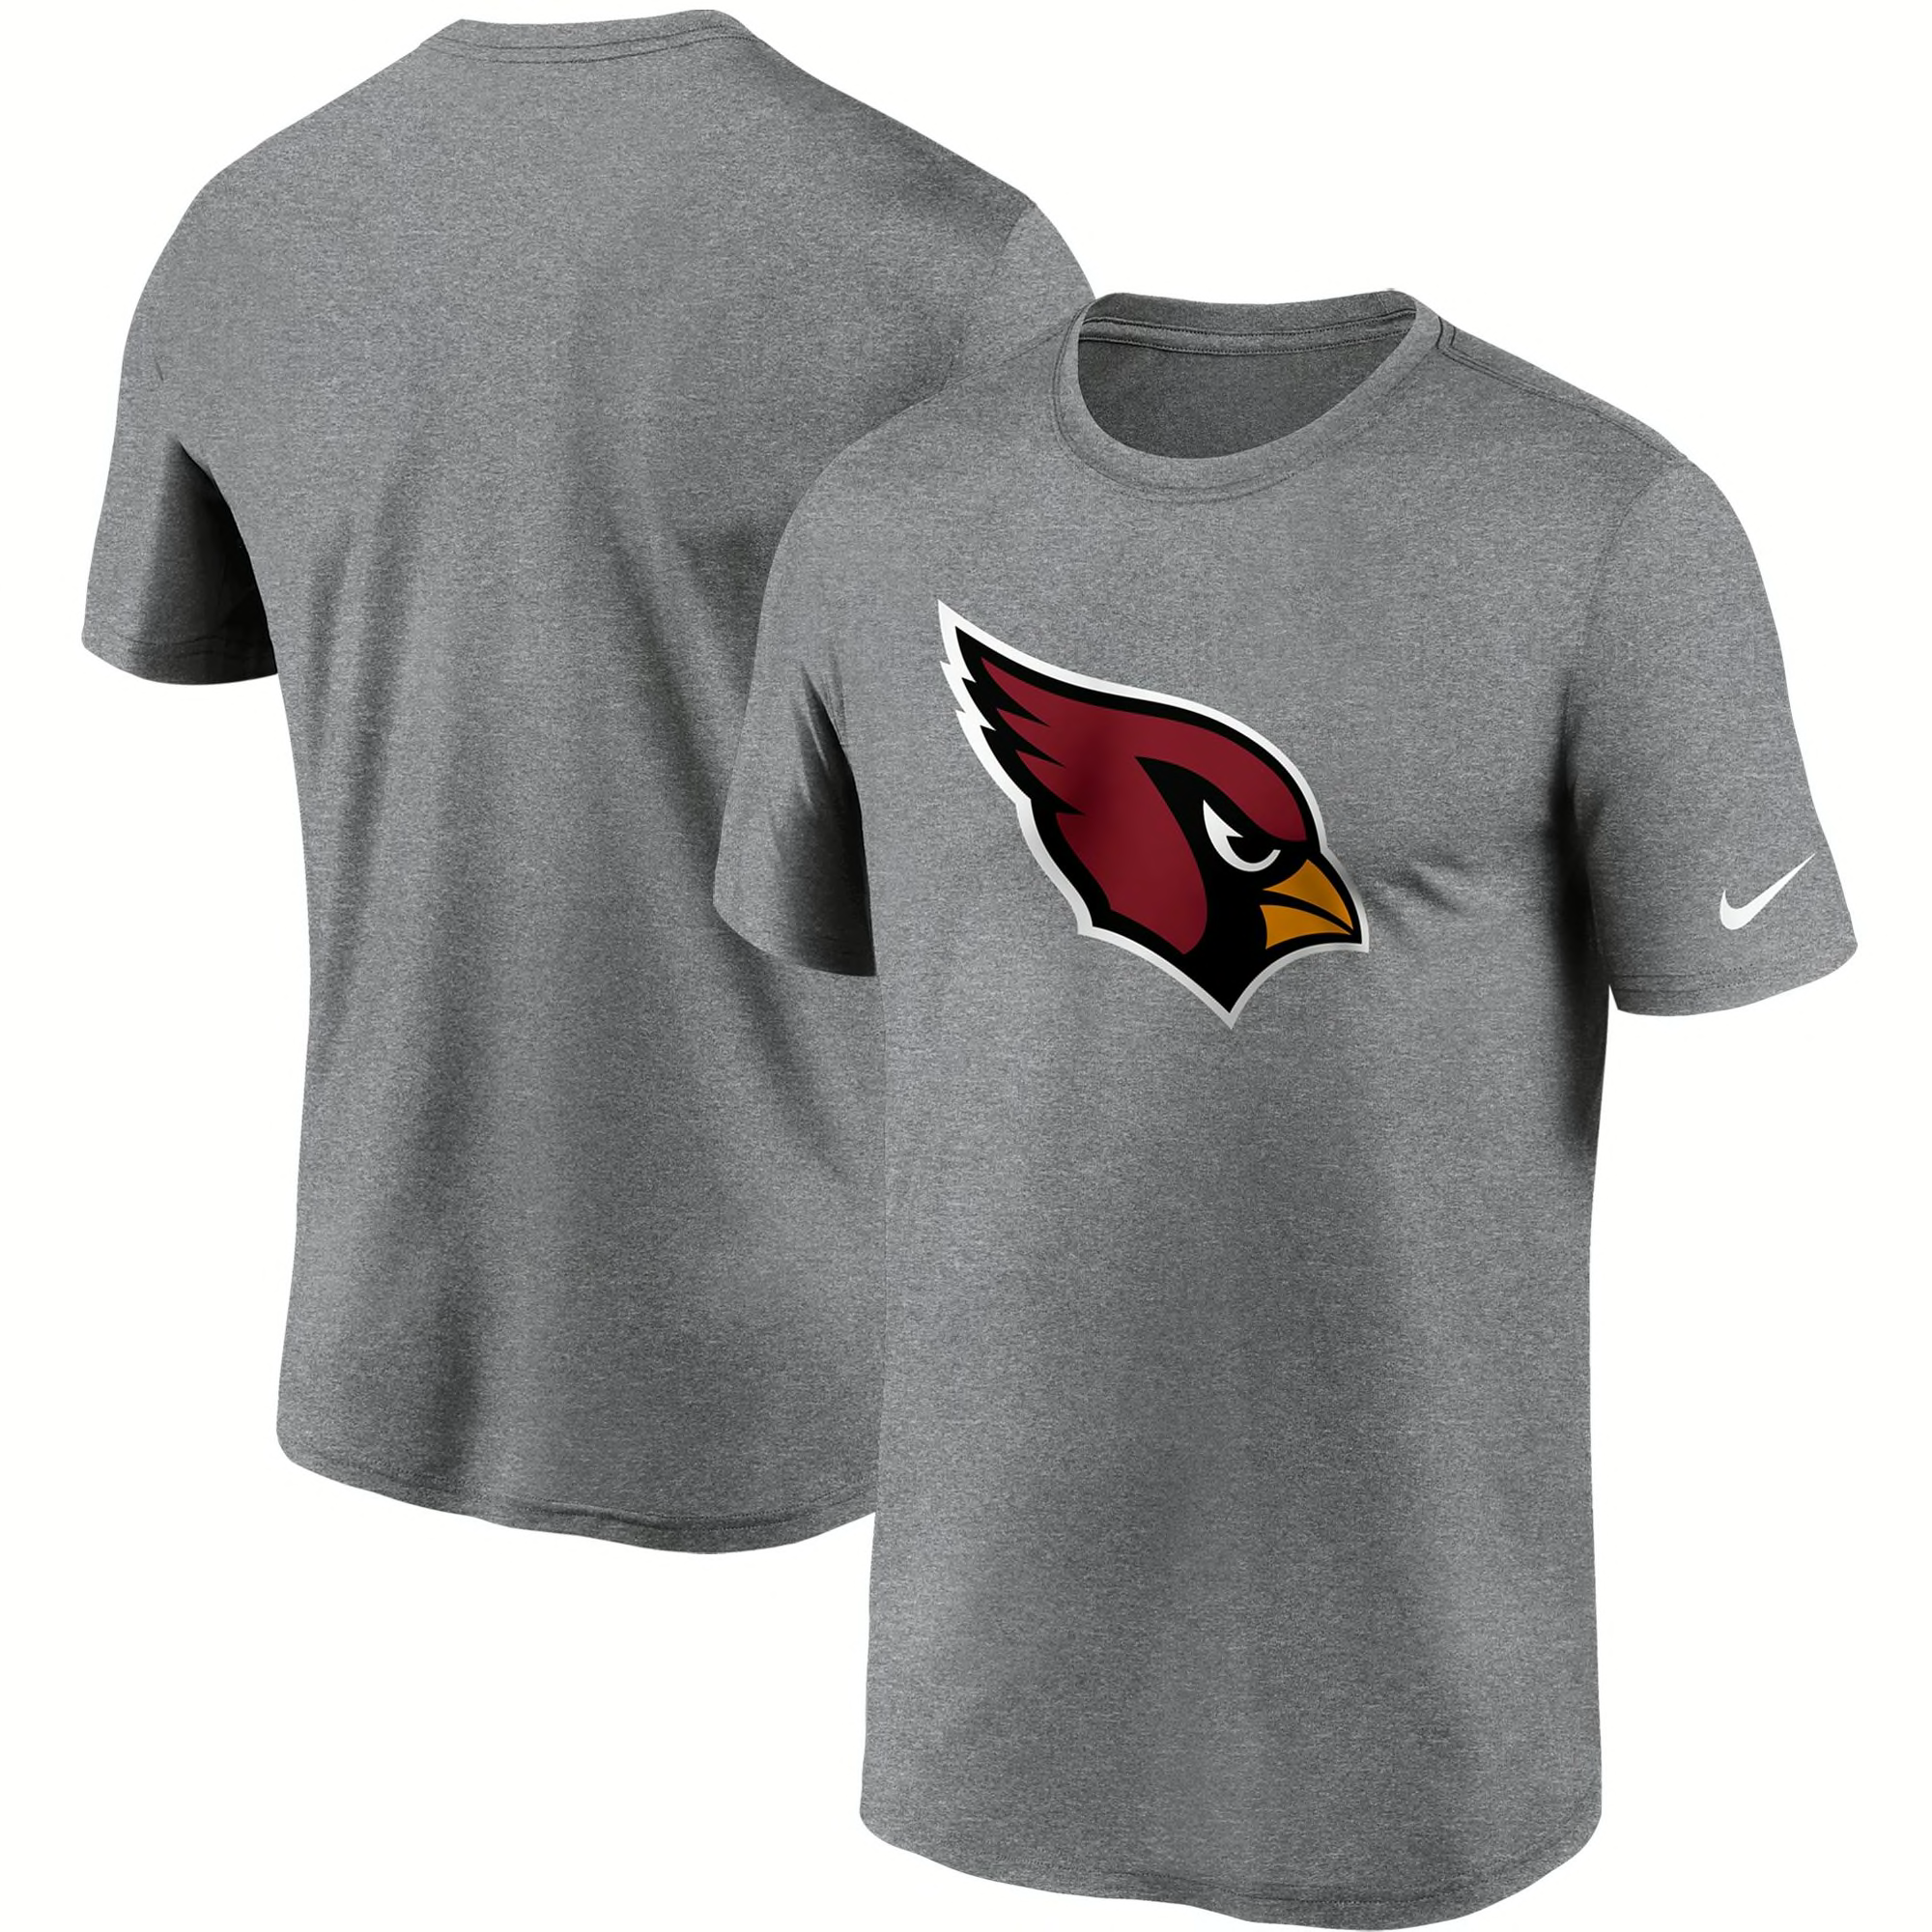 cardinals father's day jersey